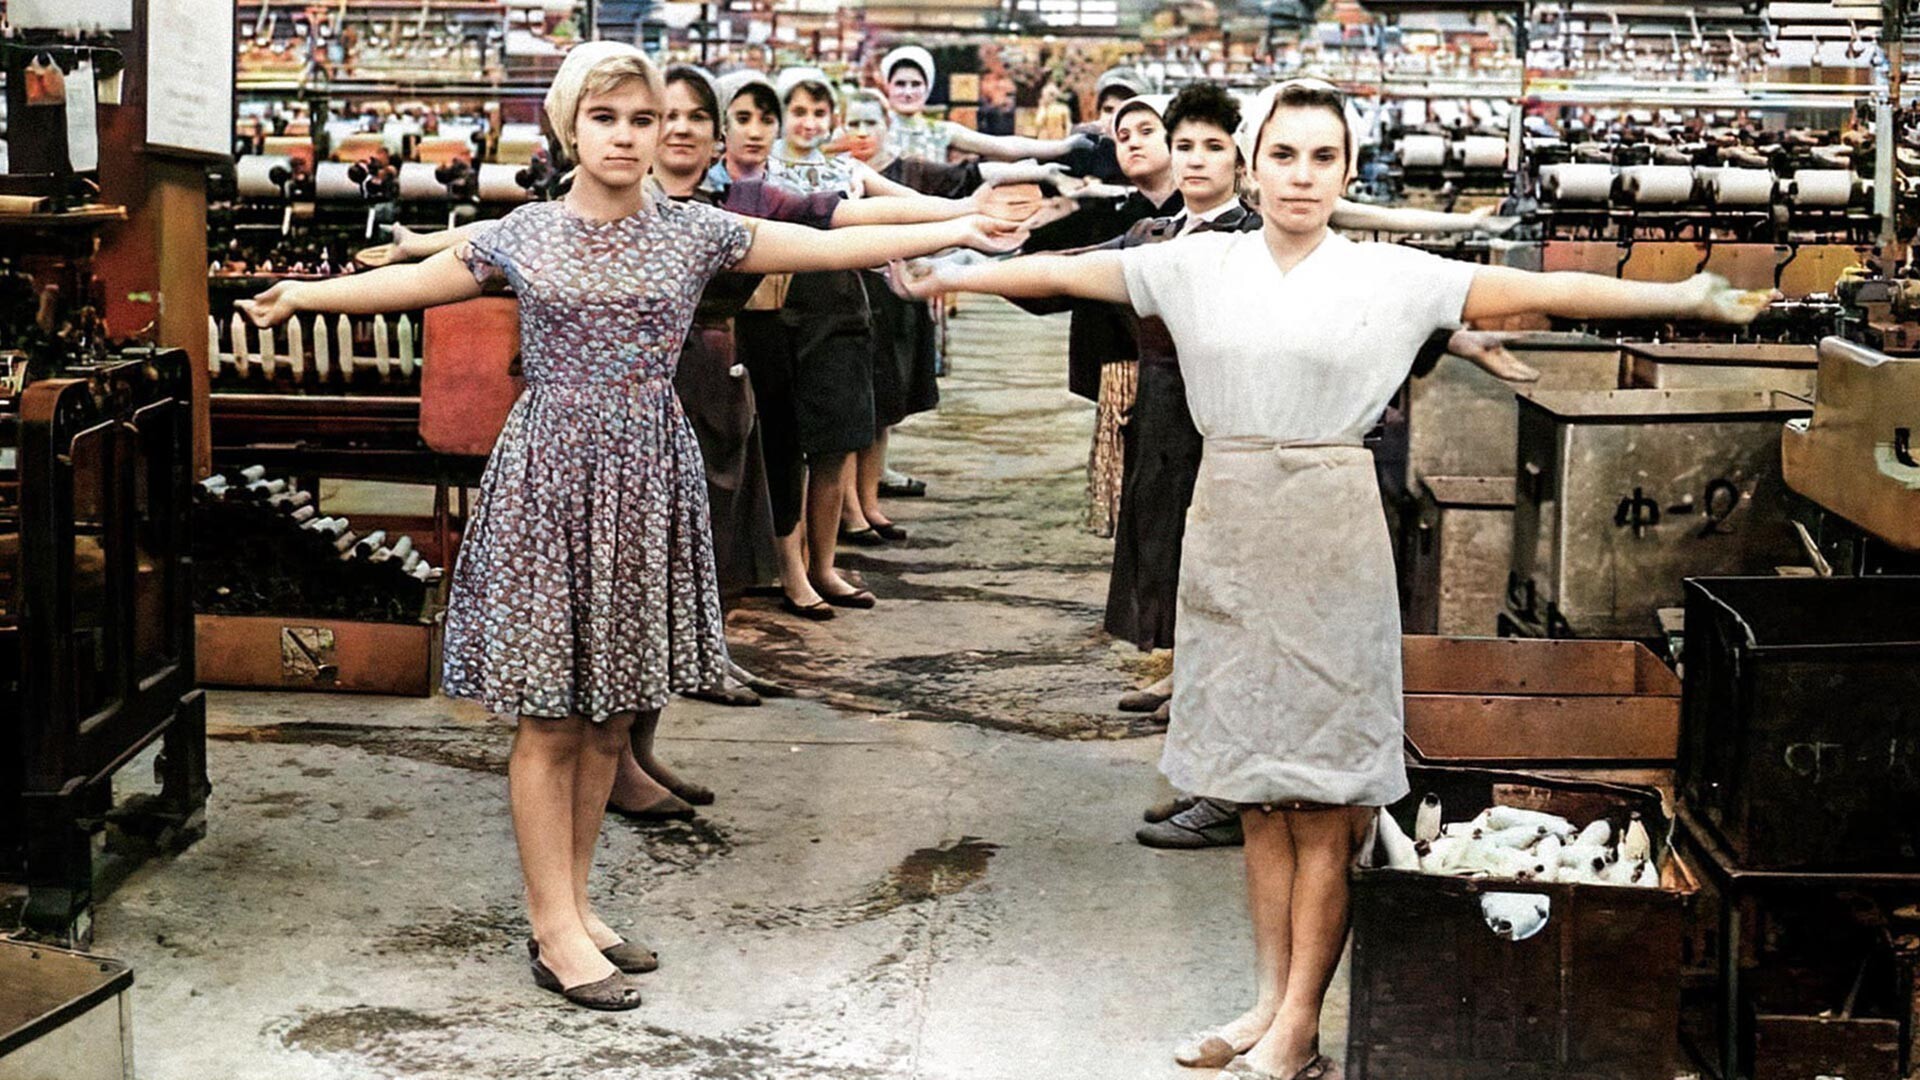 Fitness time at the textile factory, 1960s.